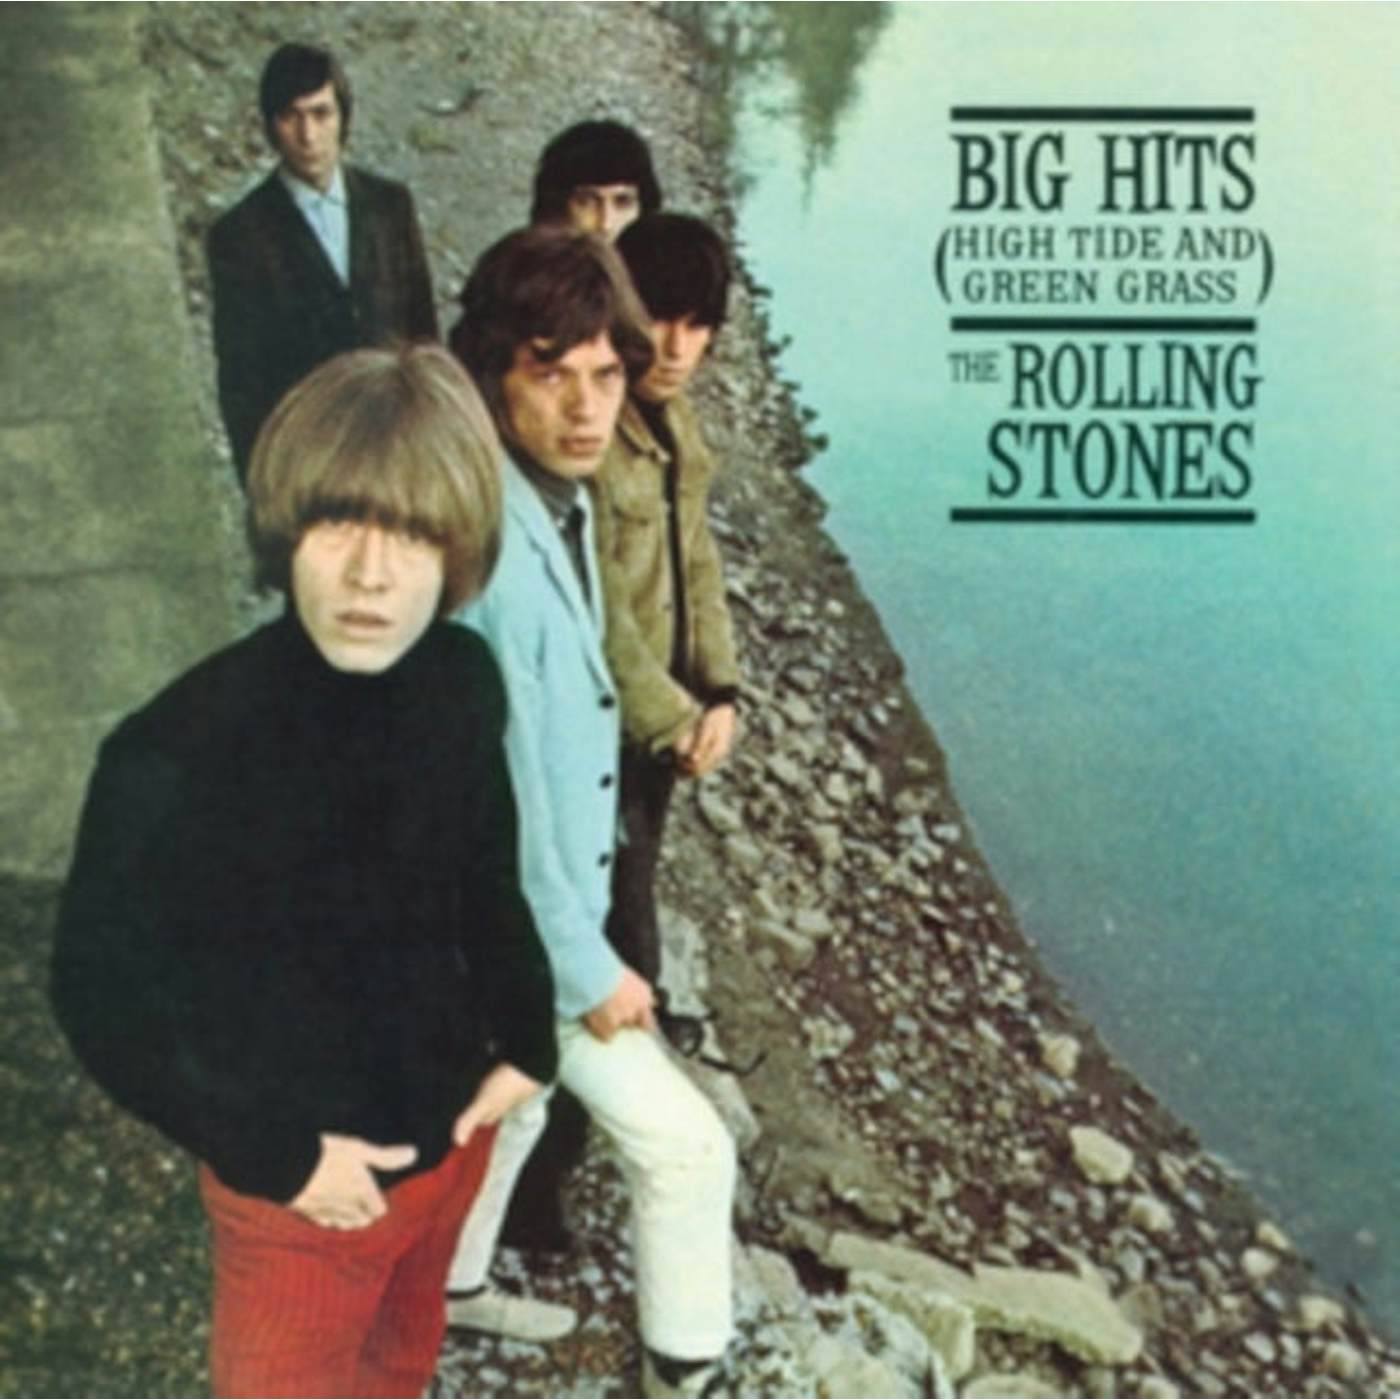 The Rolling Stones LP Vinyl Record - Big Hits (High Tides And Green Grass)